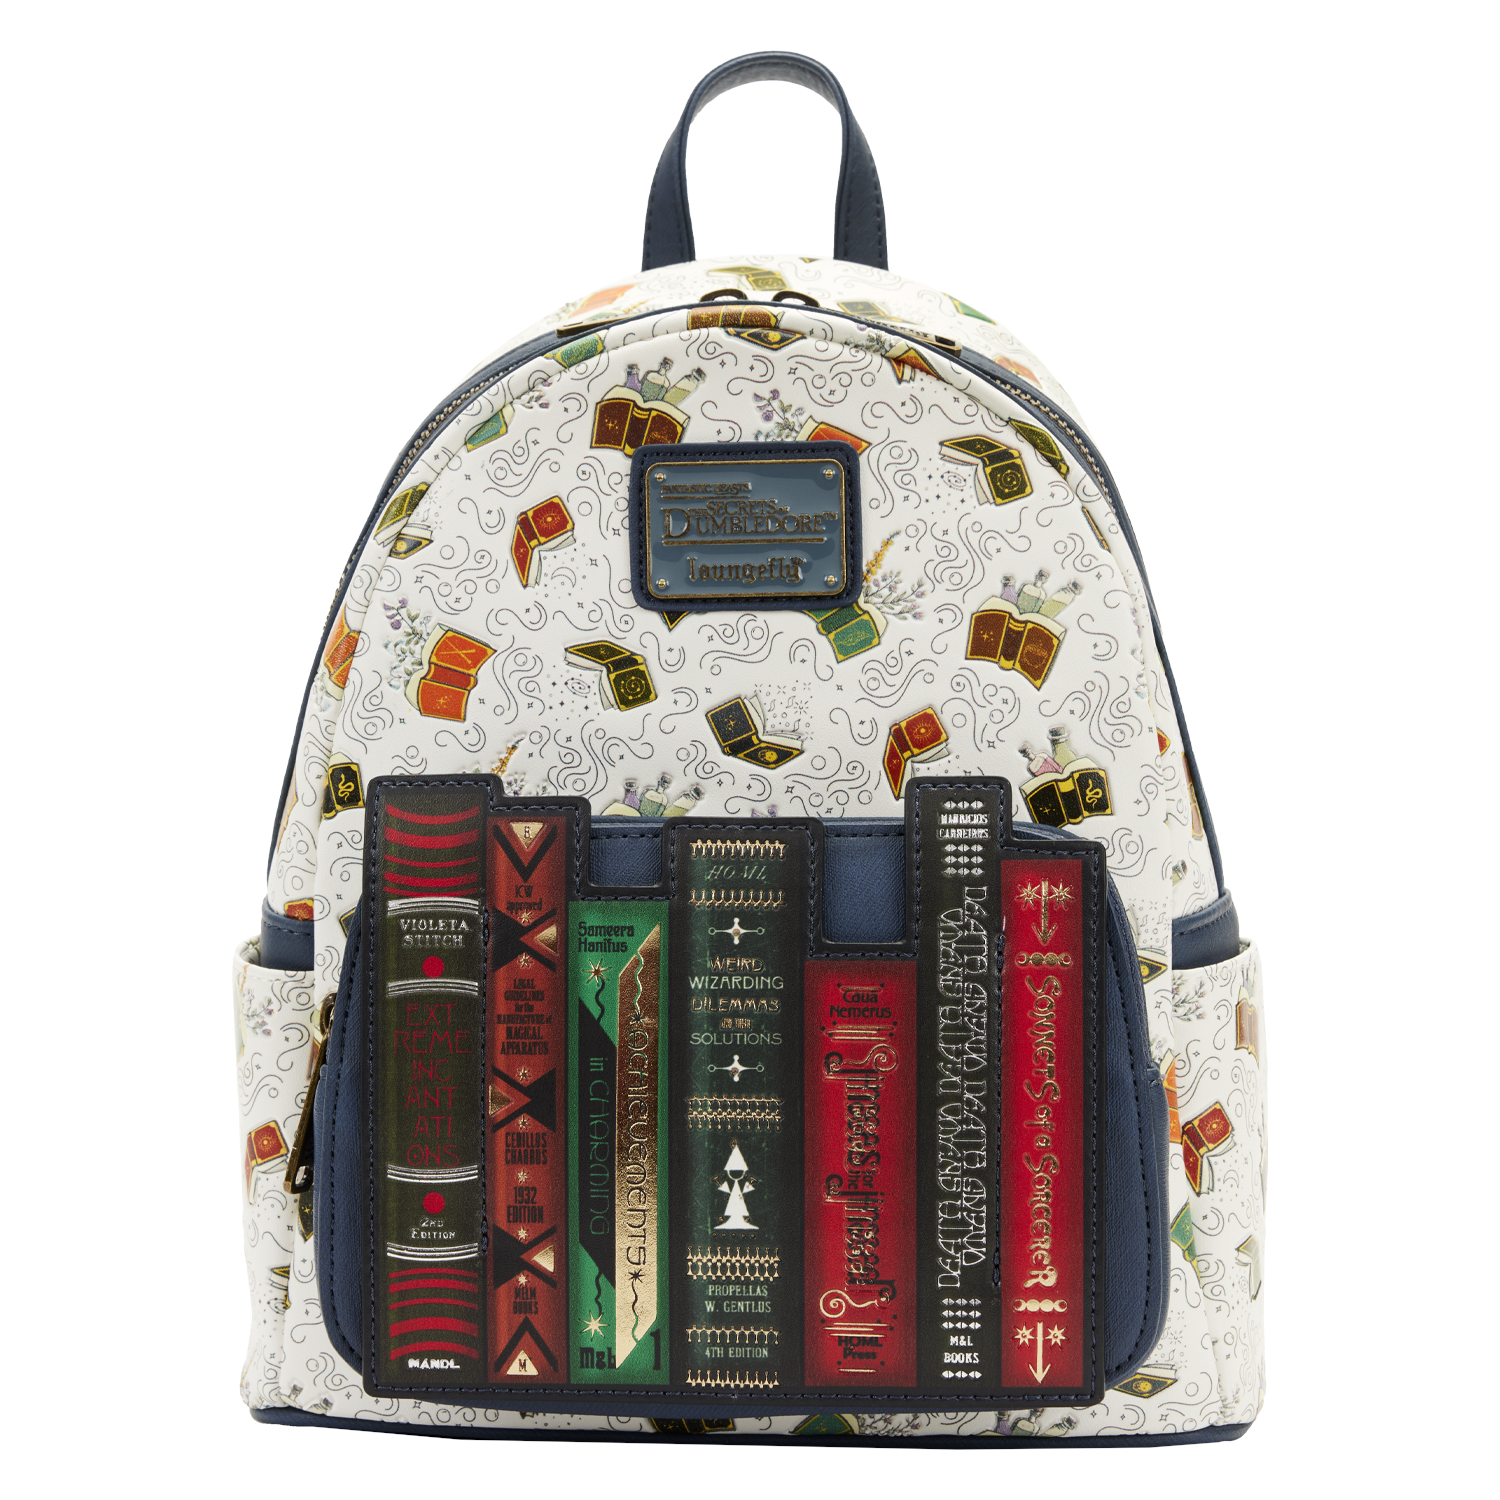 The Fantastic Beasts Magical Mini Backpack features a front pocket adorned with magical textbooks.